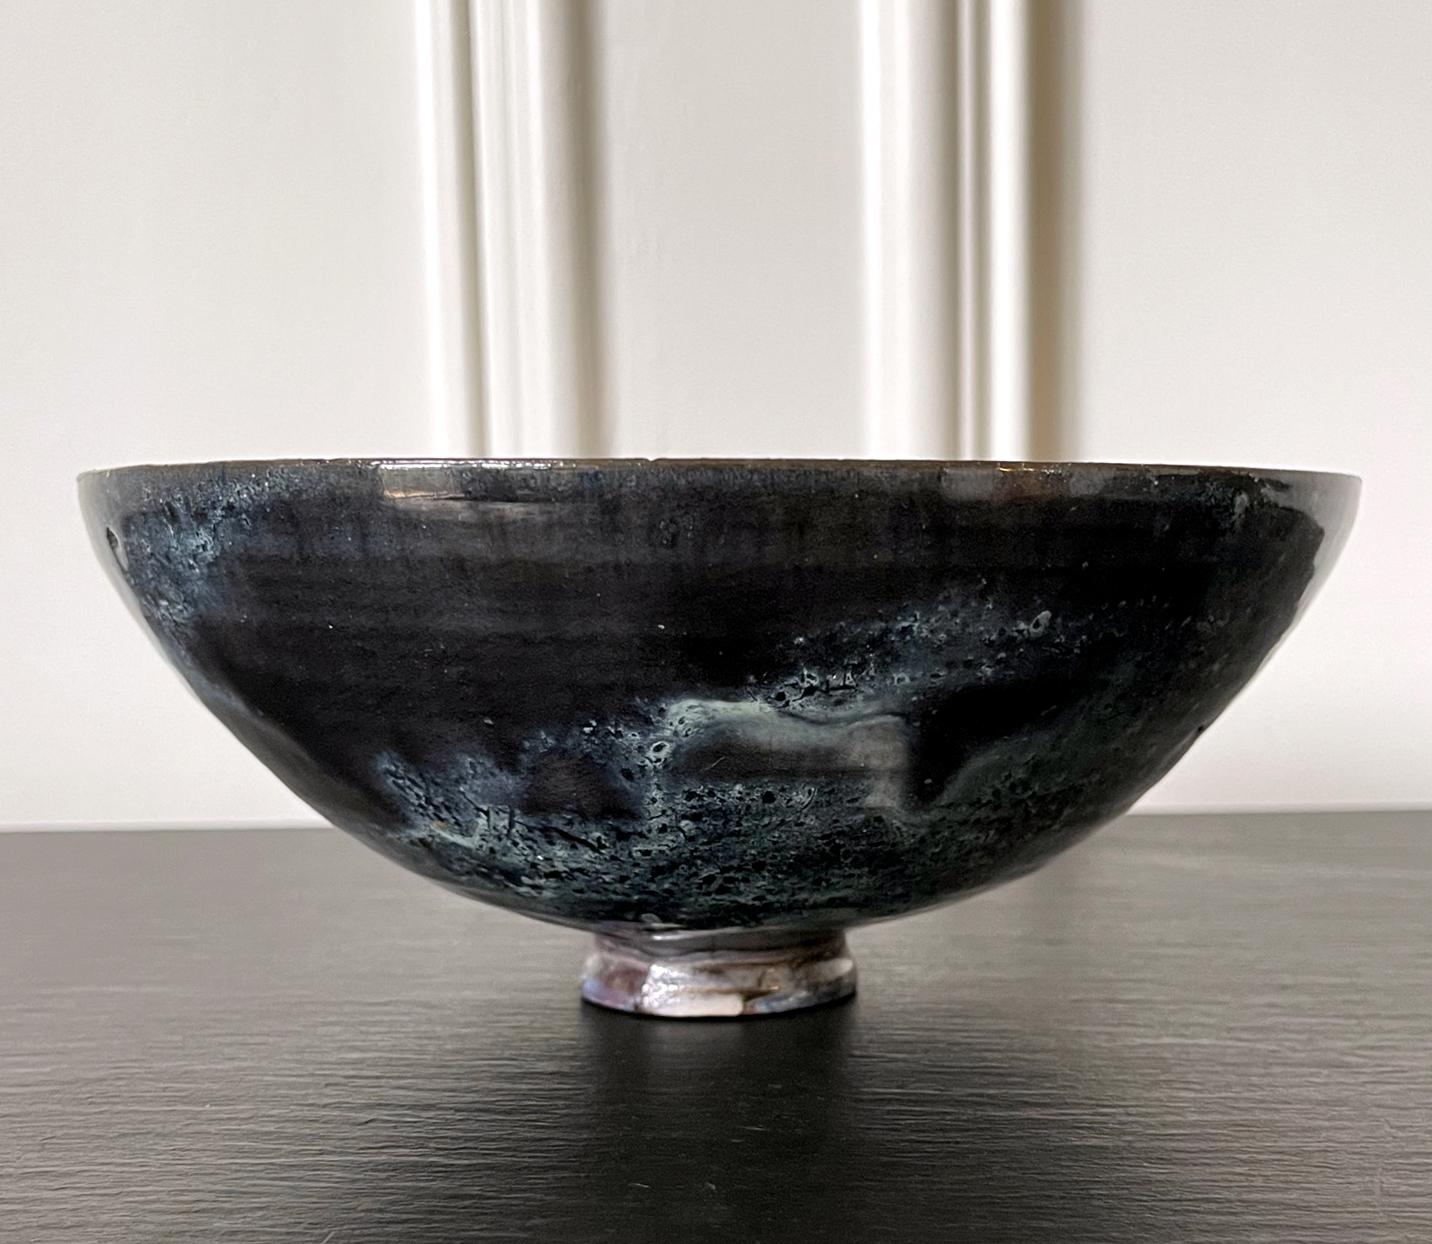 A ceramic bowl by American artist and studio potter Beatrice Wood (1893-1998). The elegant bowl has a deep half-hemisphere form that is supported by a short and small foot ring. The wall was rather thinly potted, a little unusual for the artist. The